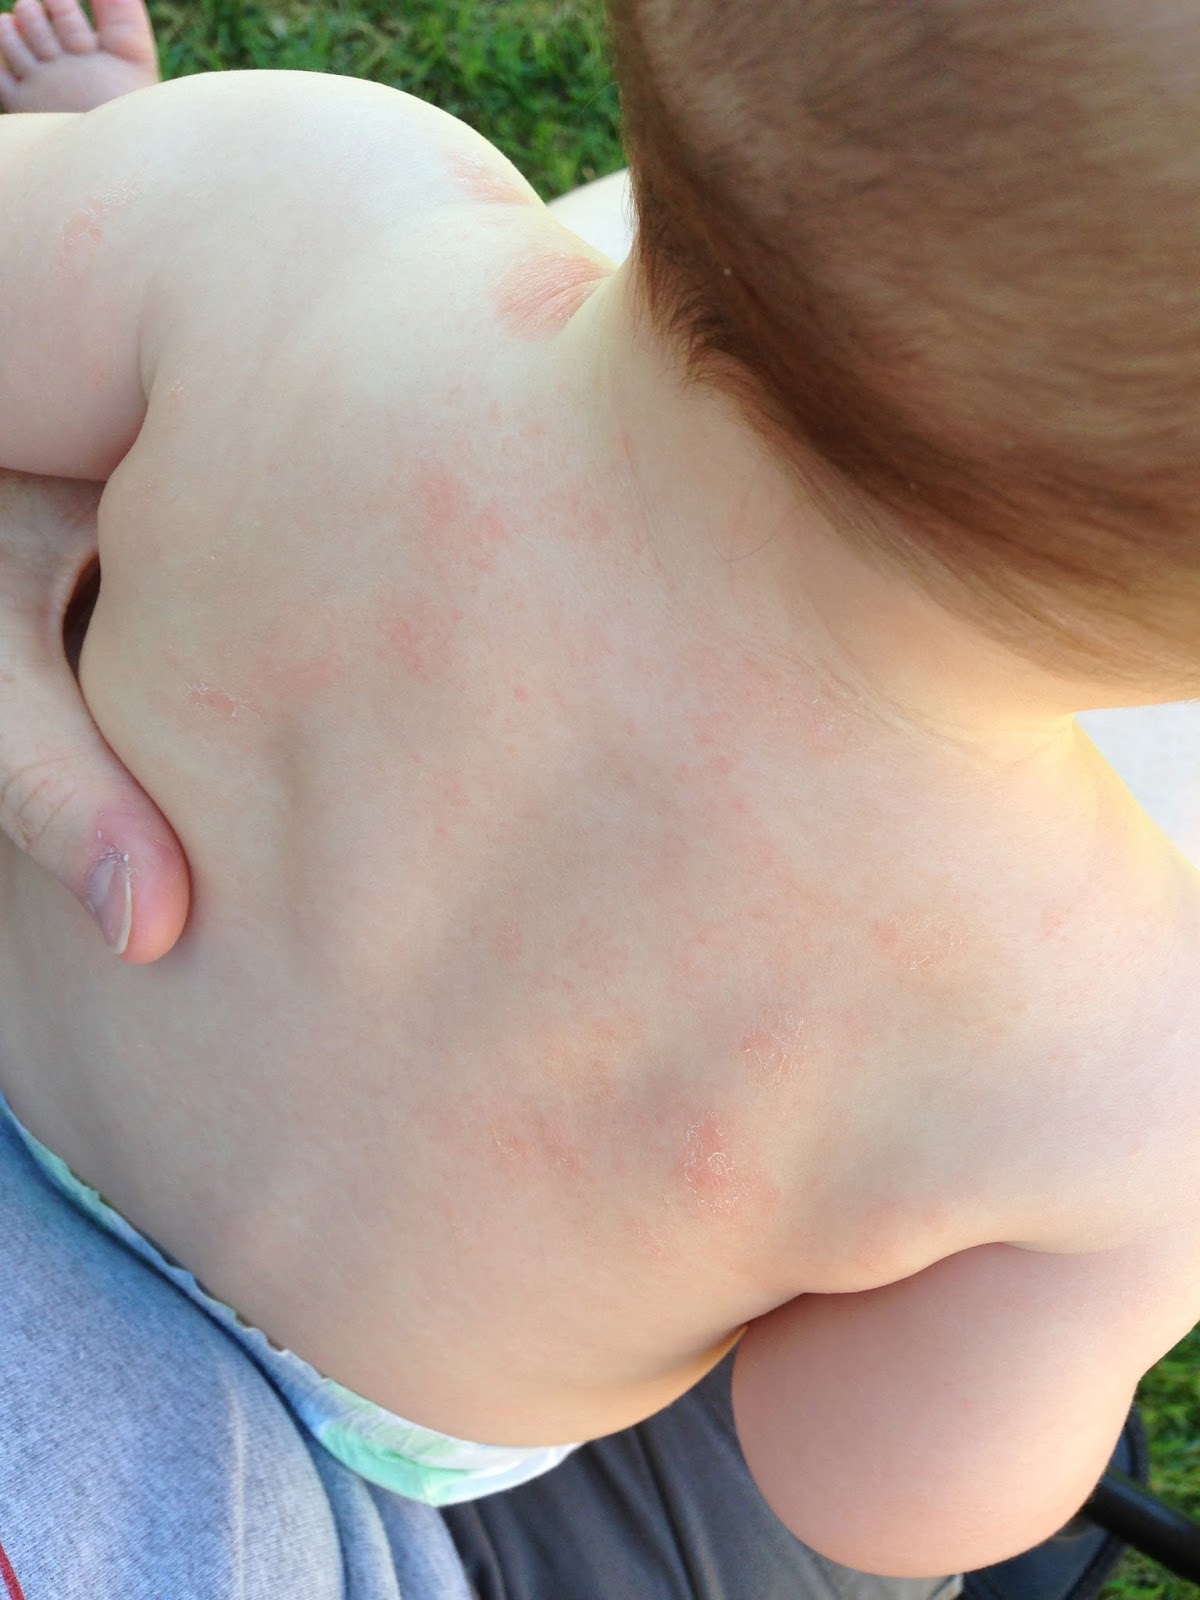 how to treat ringworm in babies